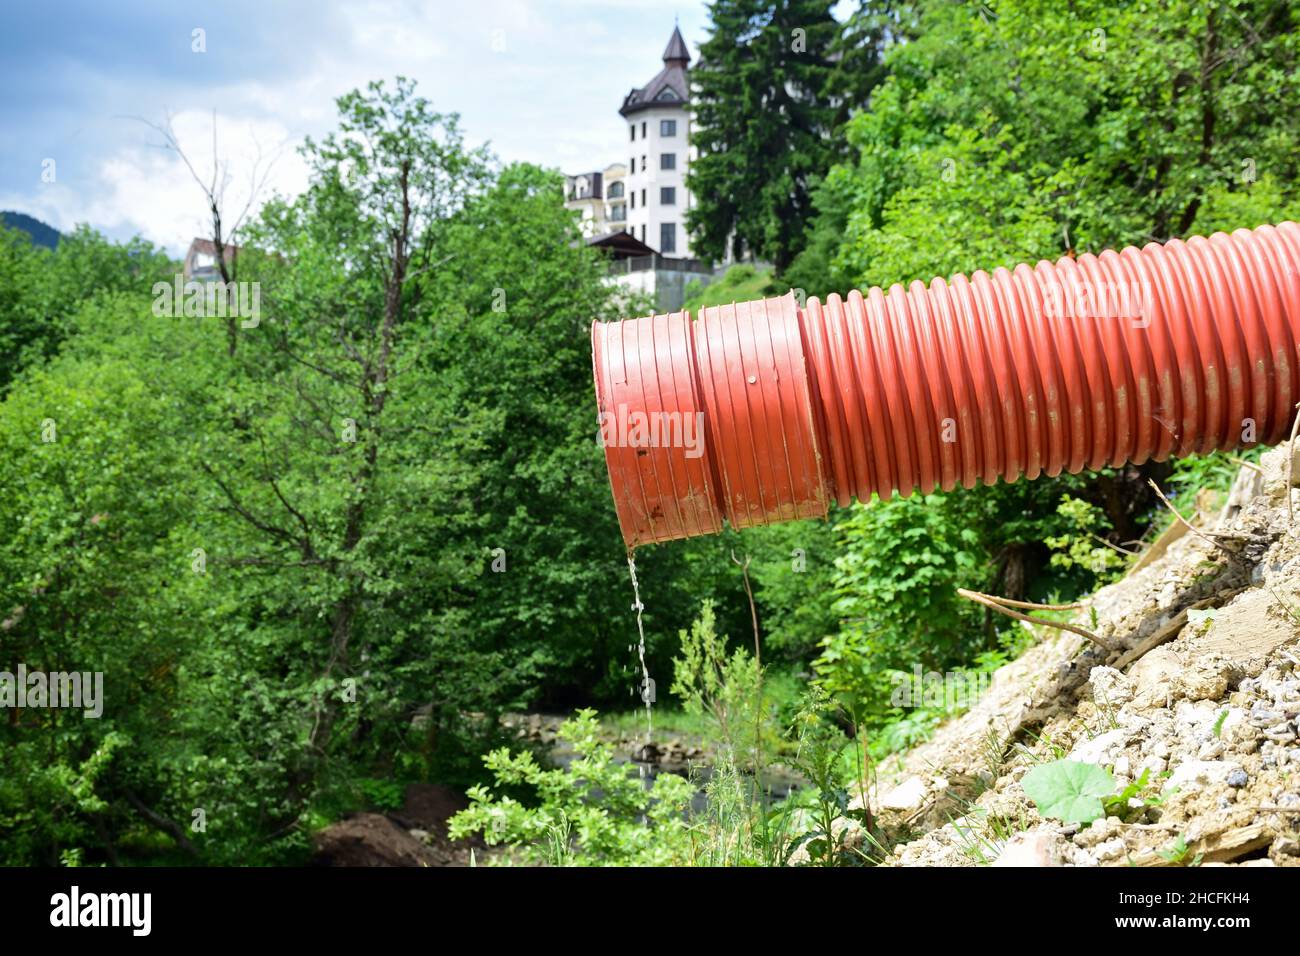 A thin stream of water flows from a red plastic sewer pipe against a blurred background of trees and a building Stock Photo